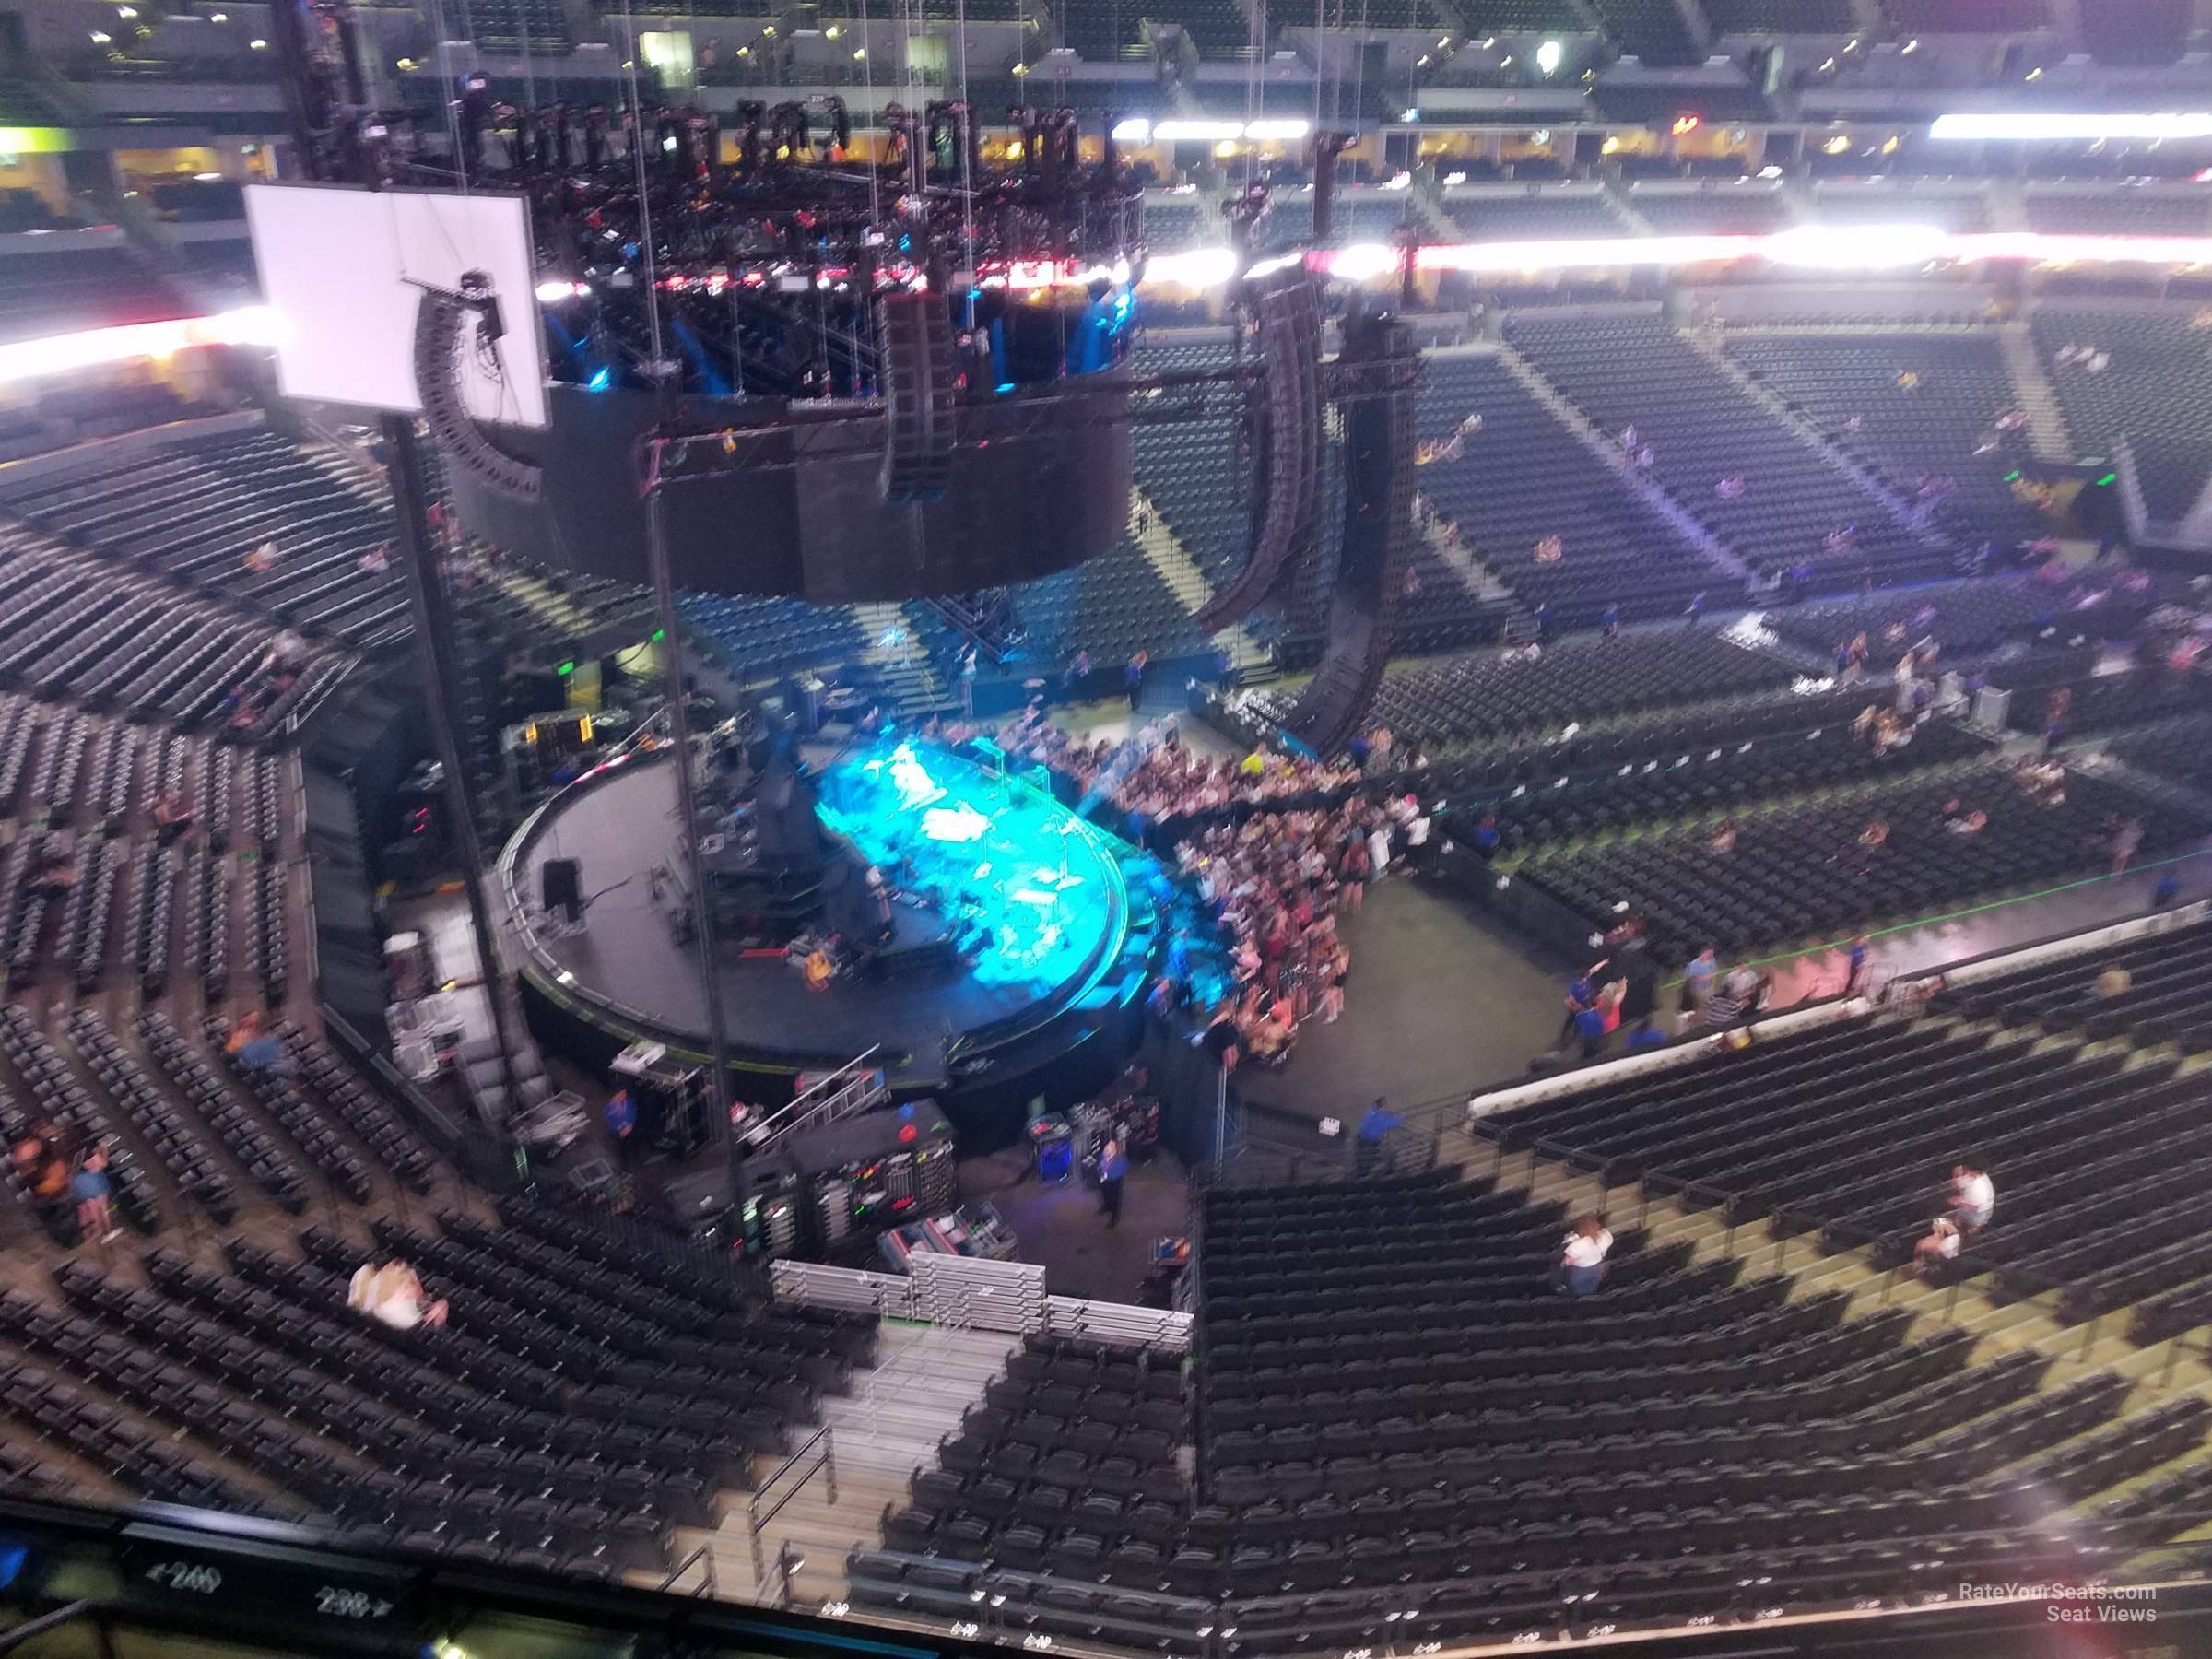 section 351, row 3 seat view  for concert - ball arena